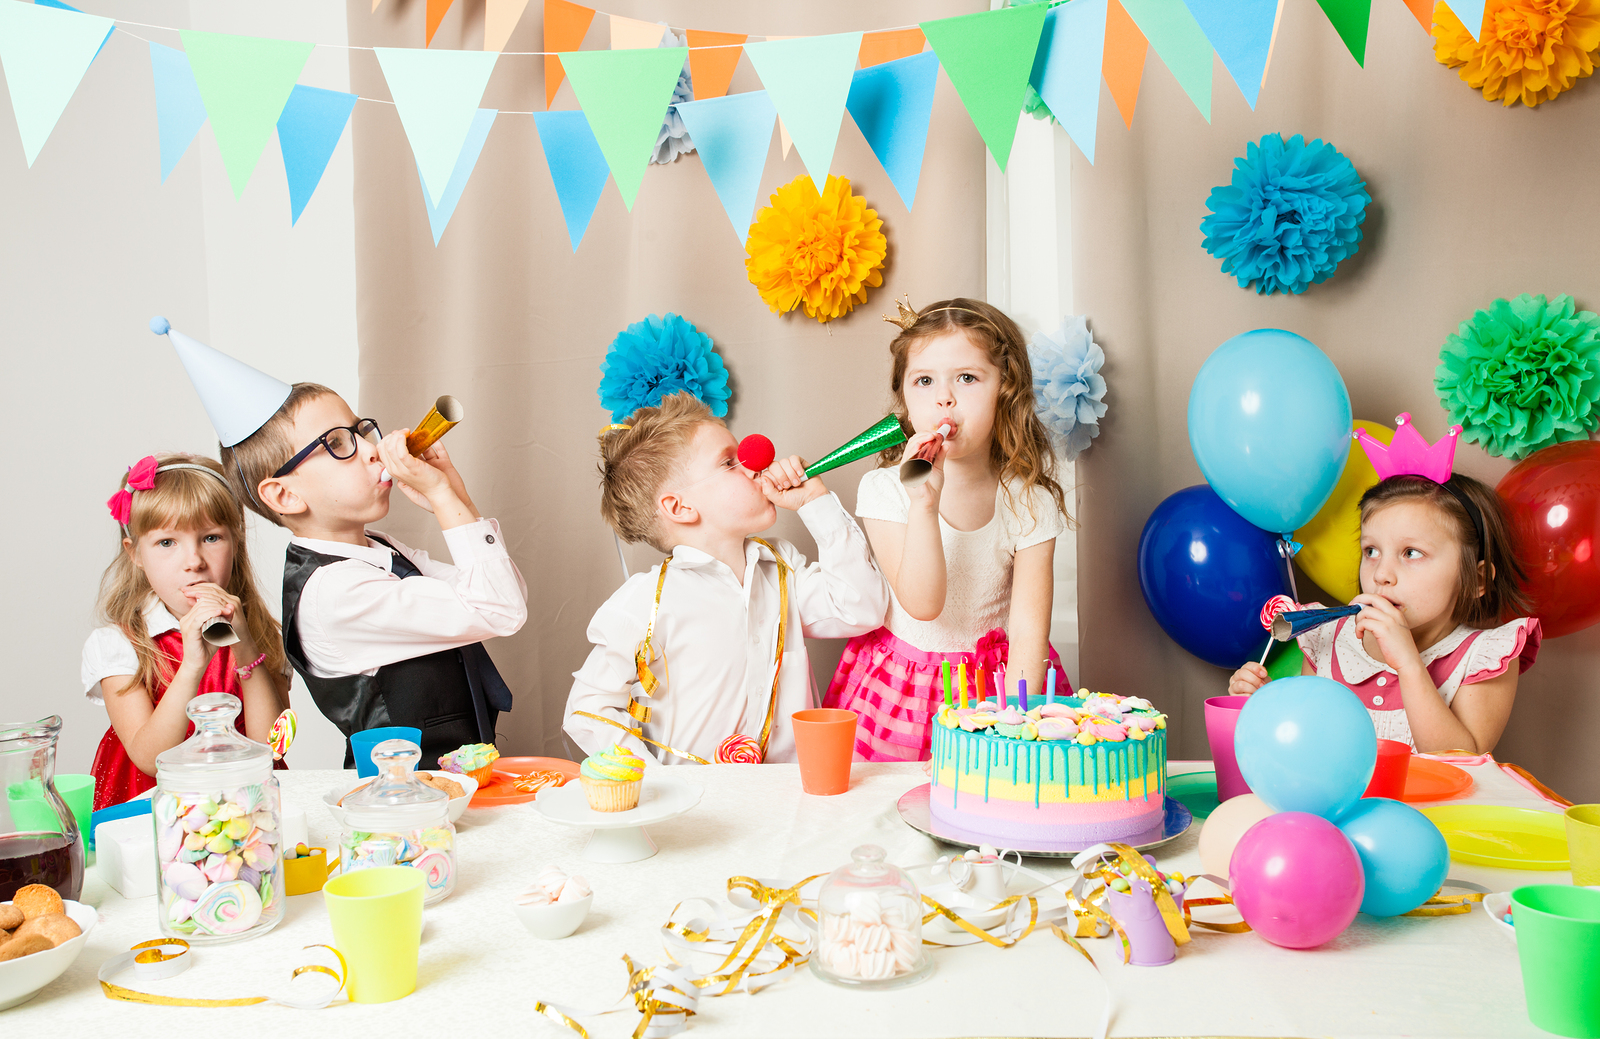 10 great tips for your DIY kids party at home | Grapevyne